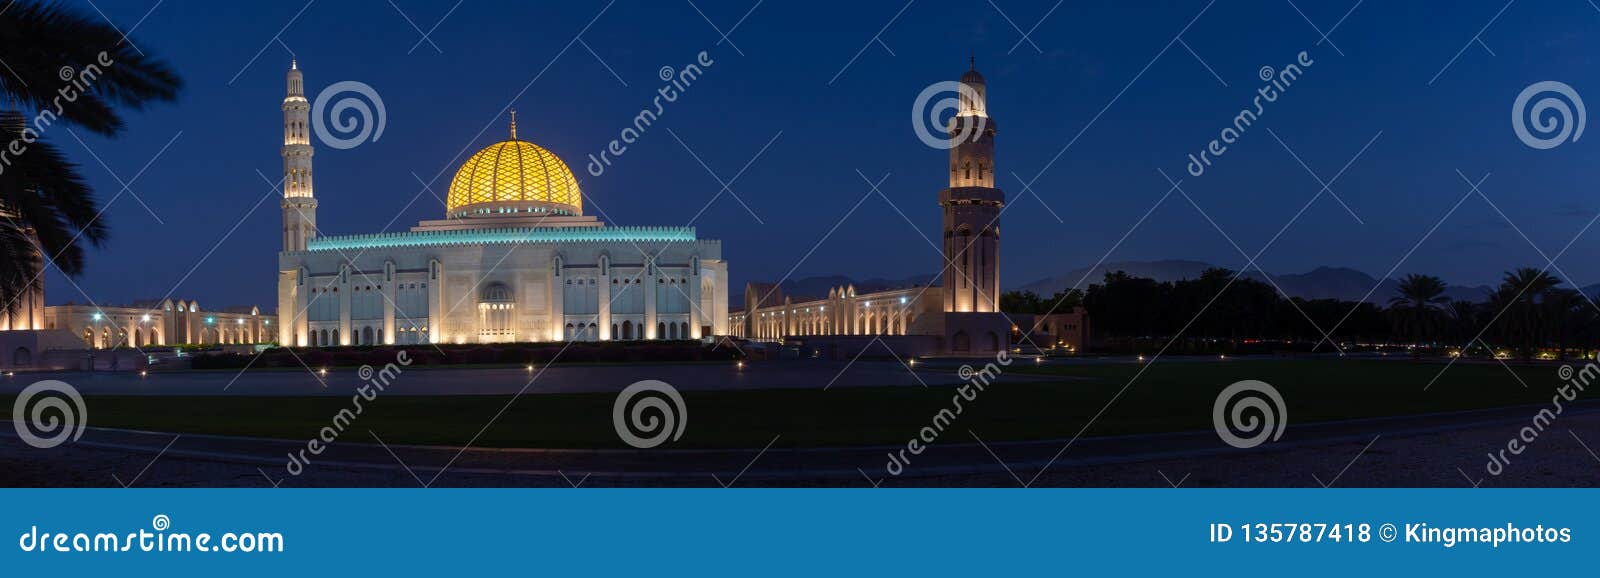 panorama of sultan qaboos grand mosque at night